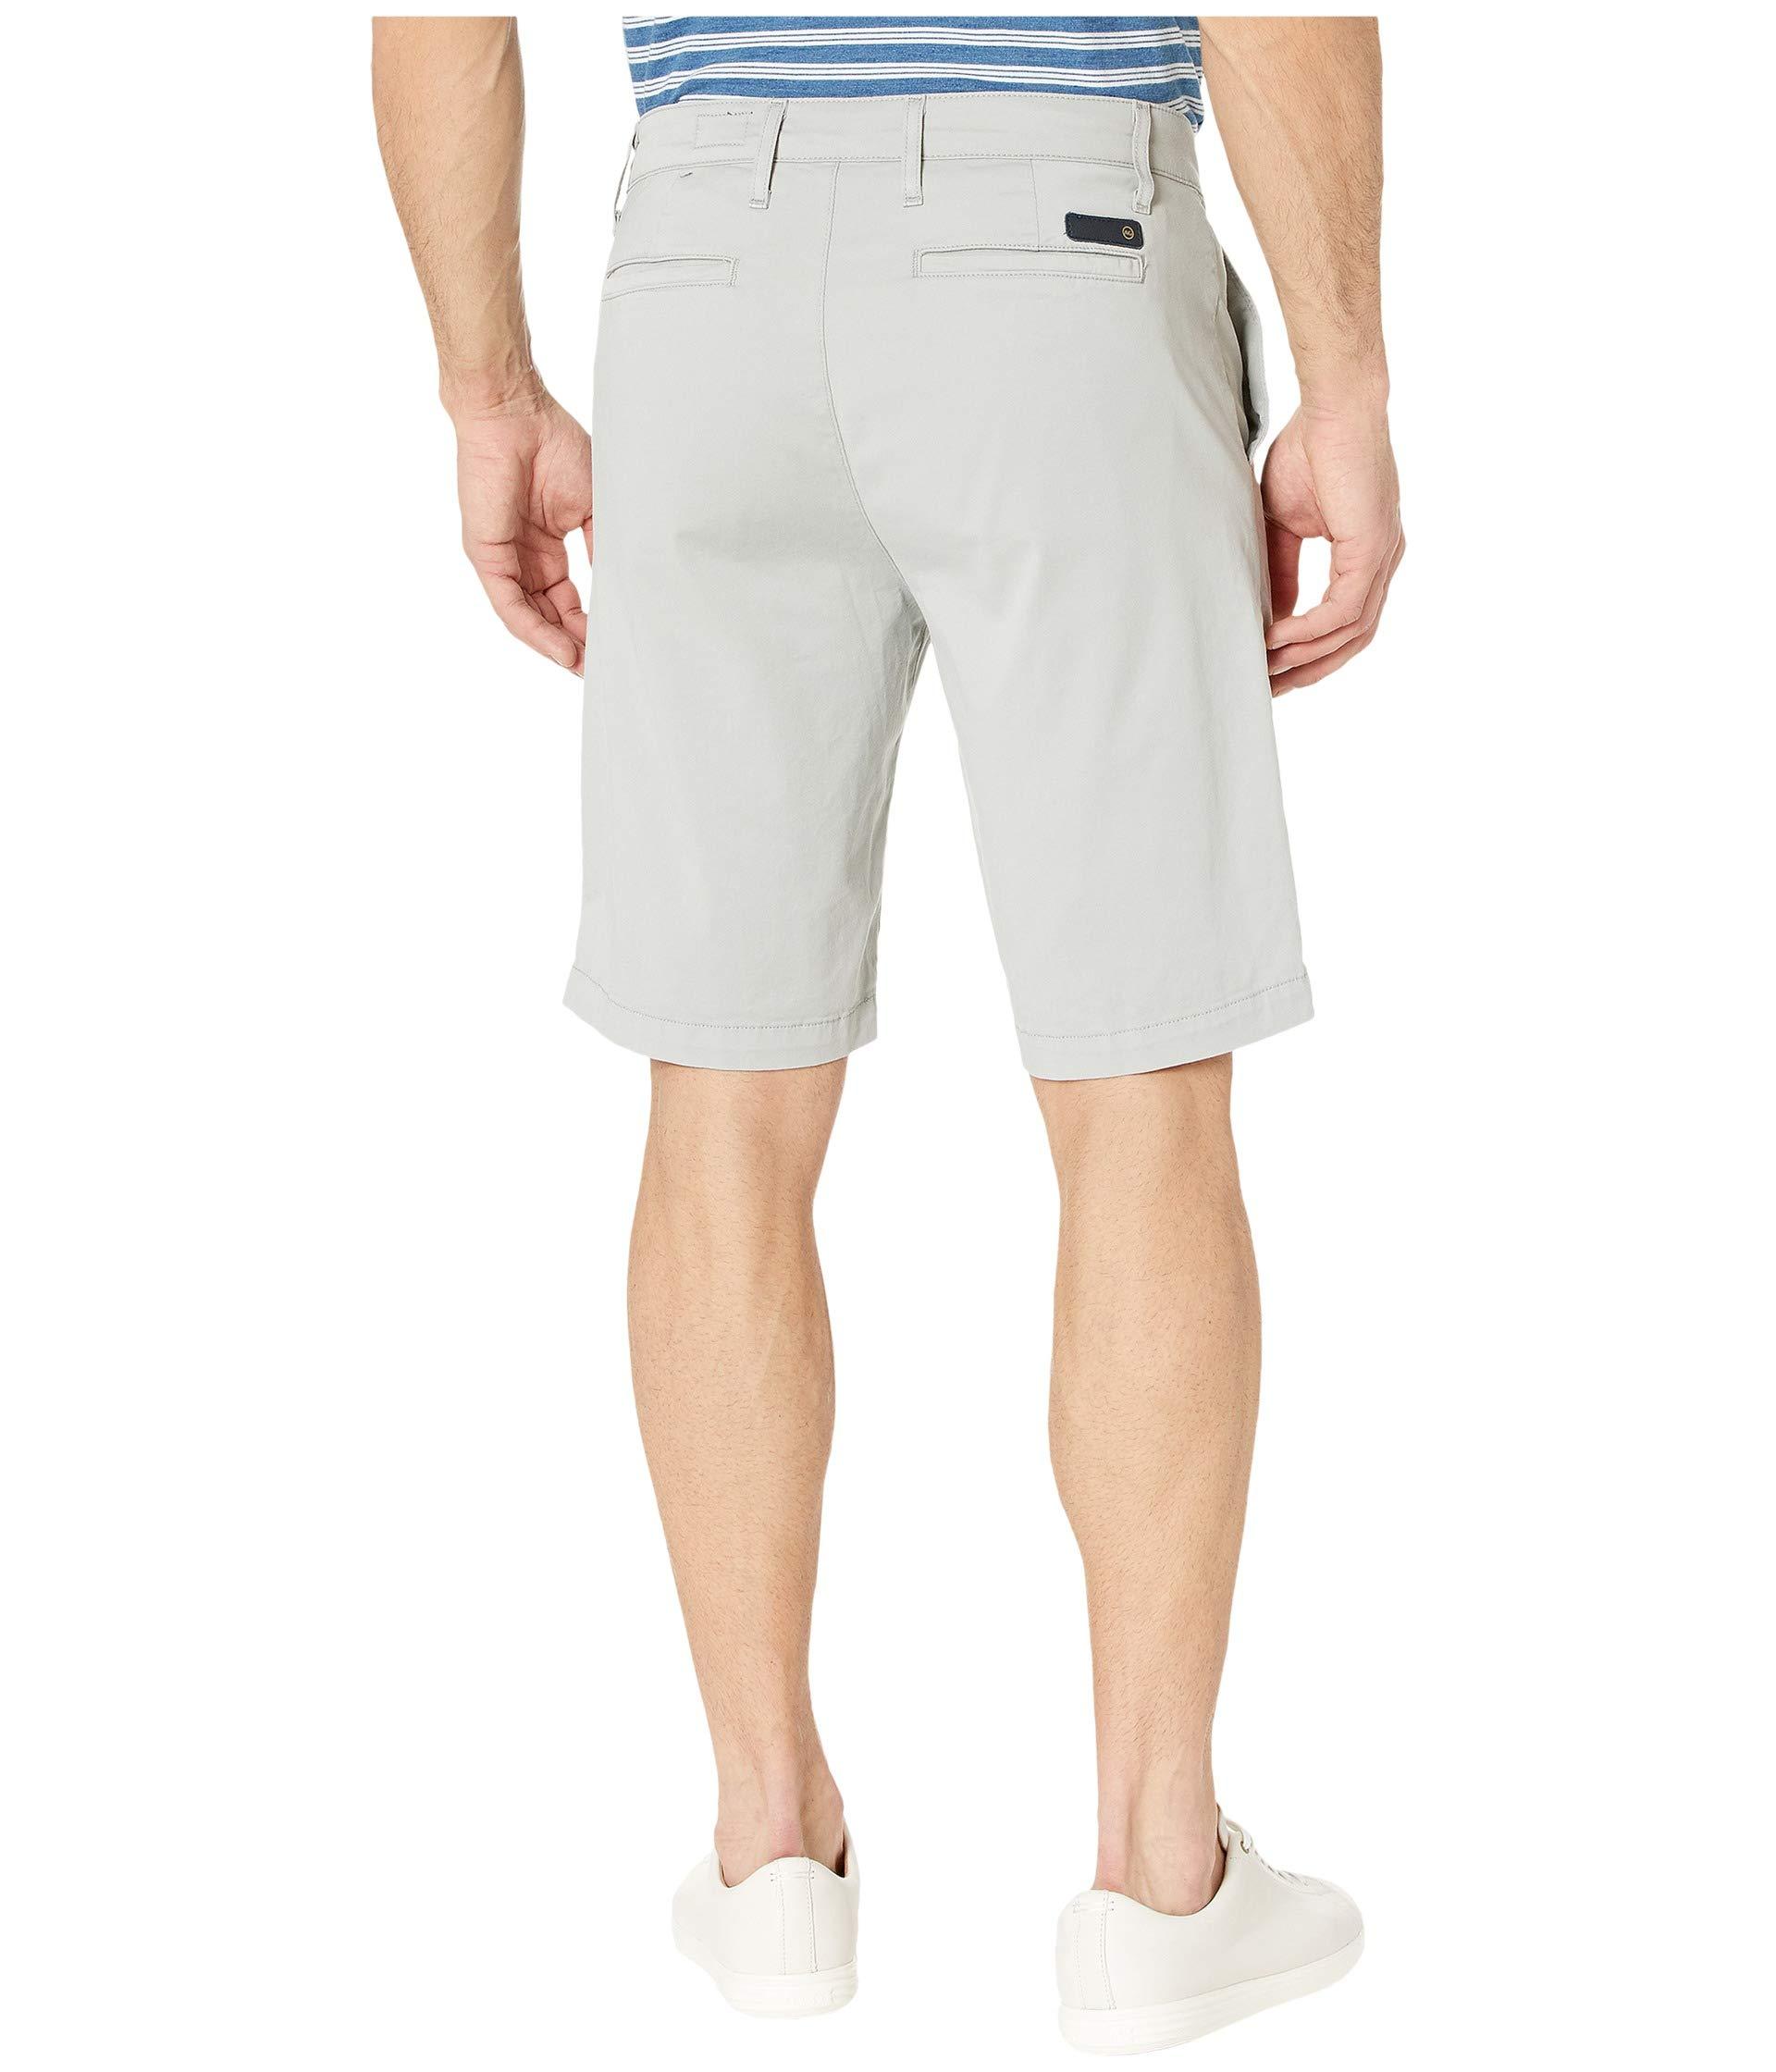 AG Jeans Cotton Griffin Tailored Shorts in Gray for Men - Lyst